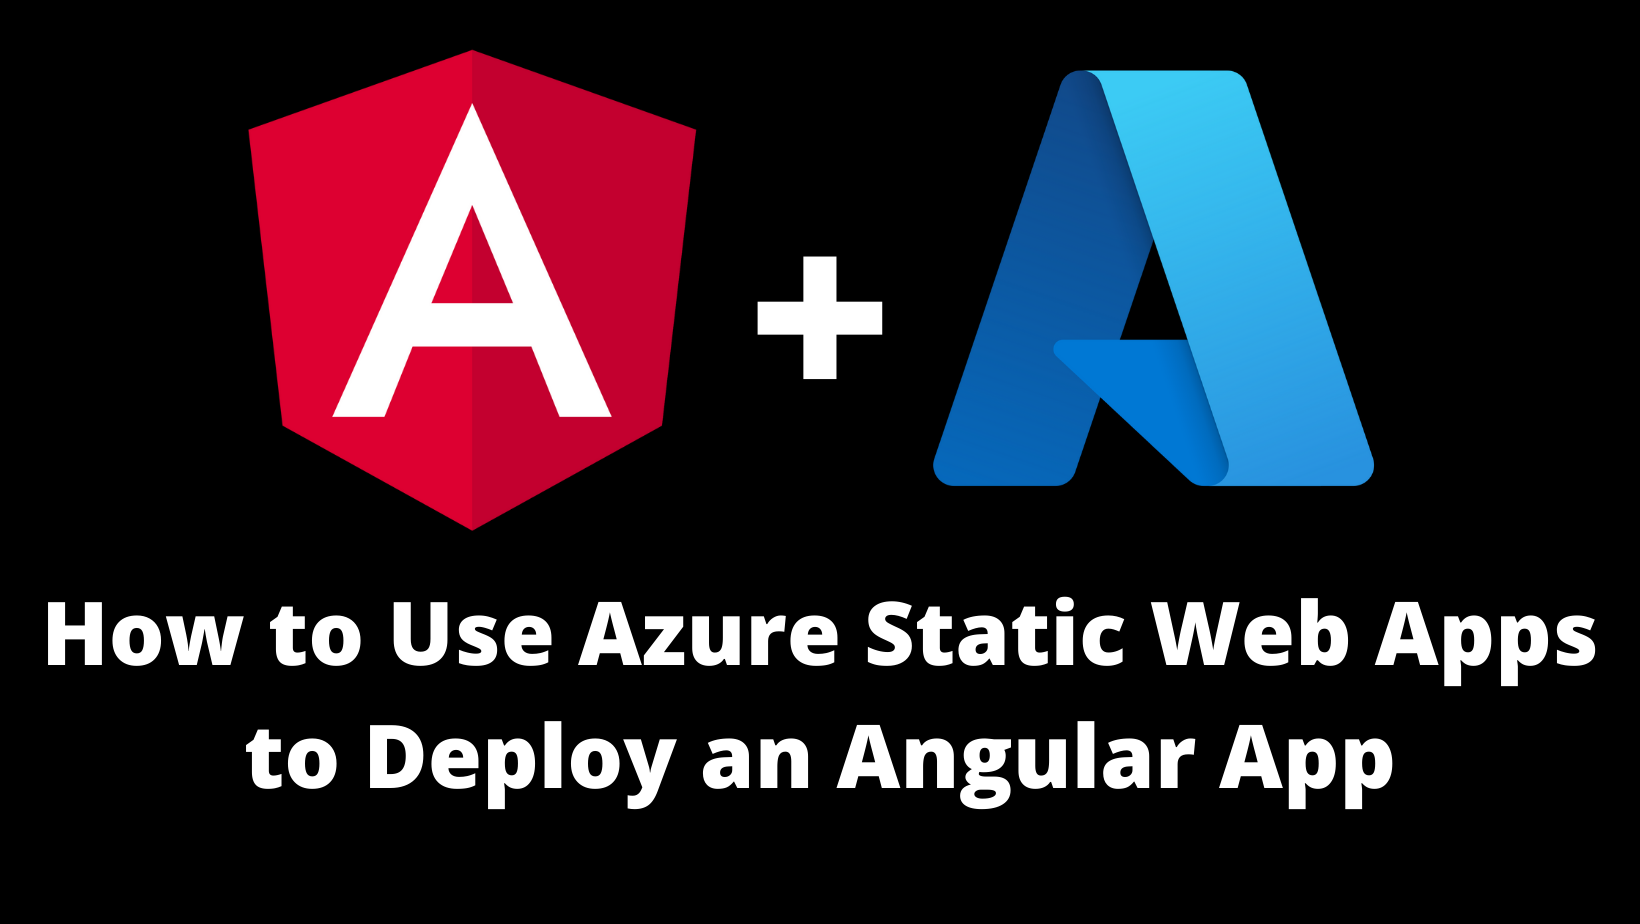 How to Use Azure Static Web Apps to Deploy an Angular App